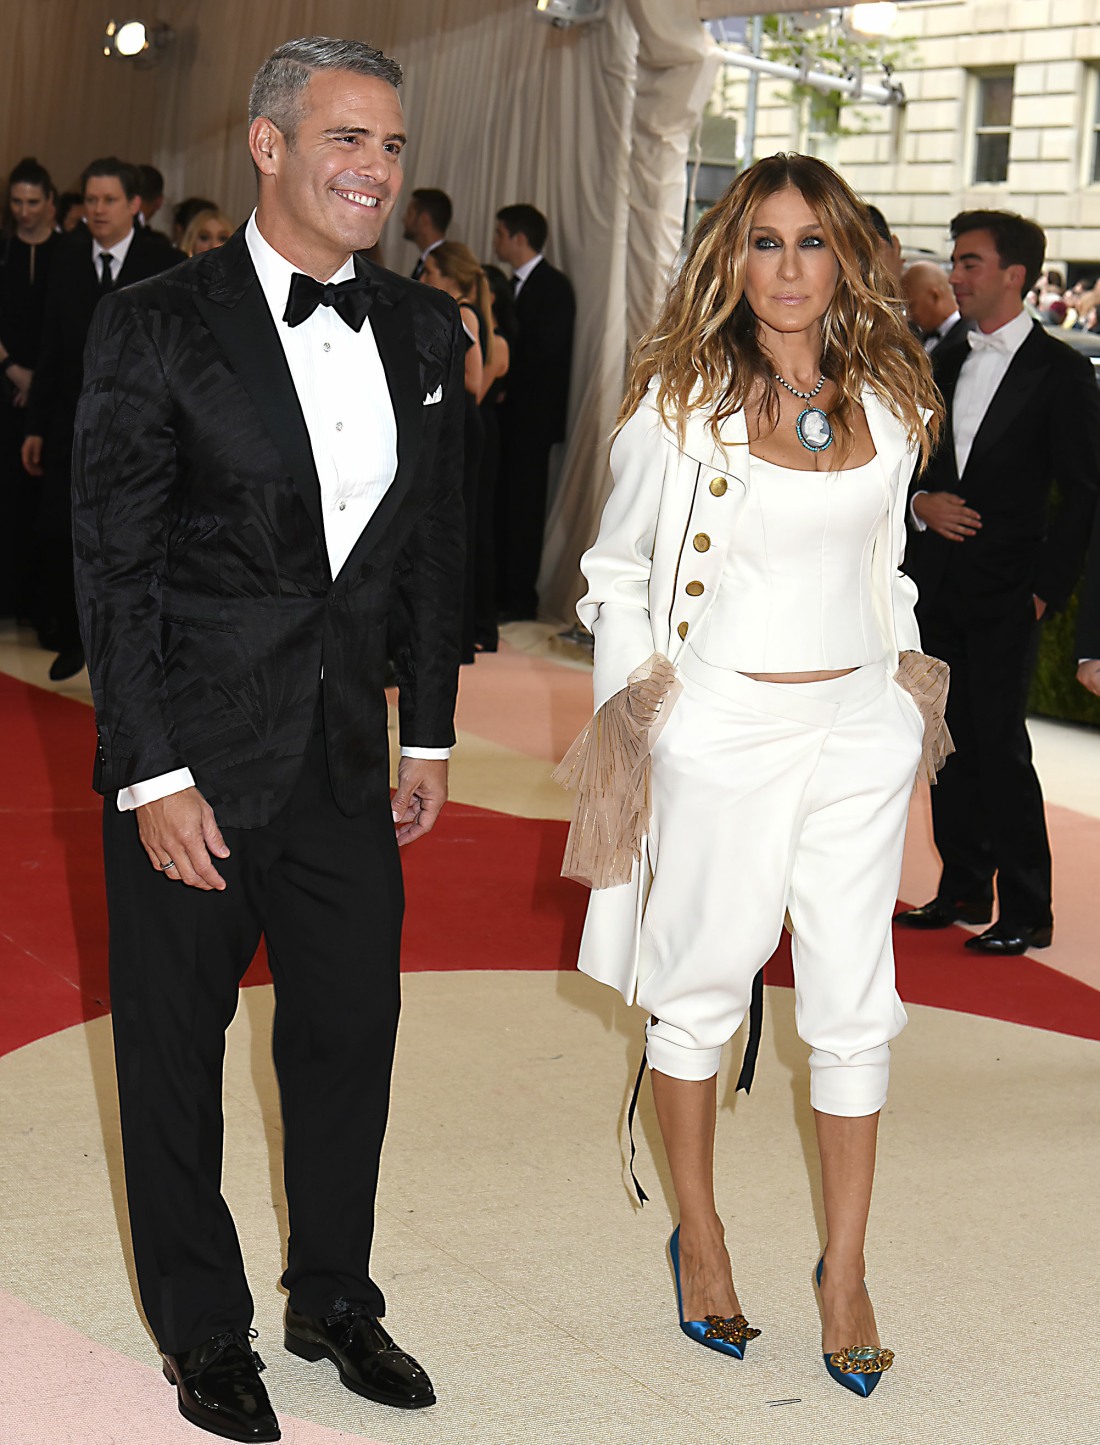 Andy Cohen and Sarah Jessica Parker attends the Metropolitan Museum of Art Costume Institute Benefit Gala on May 2, 2016 in New York, New York, USA. The show is Manus x Machina: Fashion in an Age of Technology.  photo by Robin Platzer/Twin Images/Photo